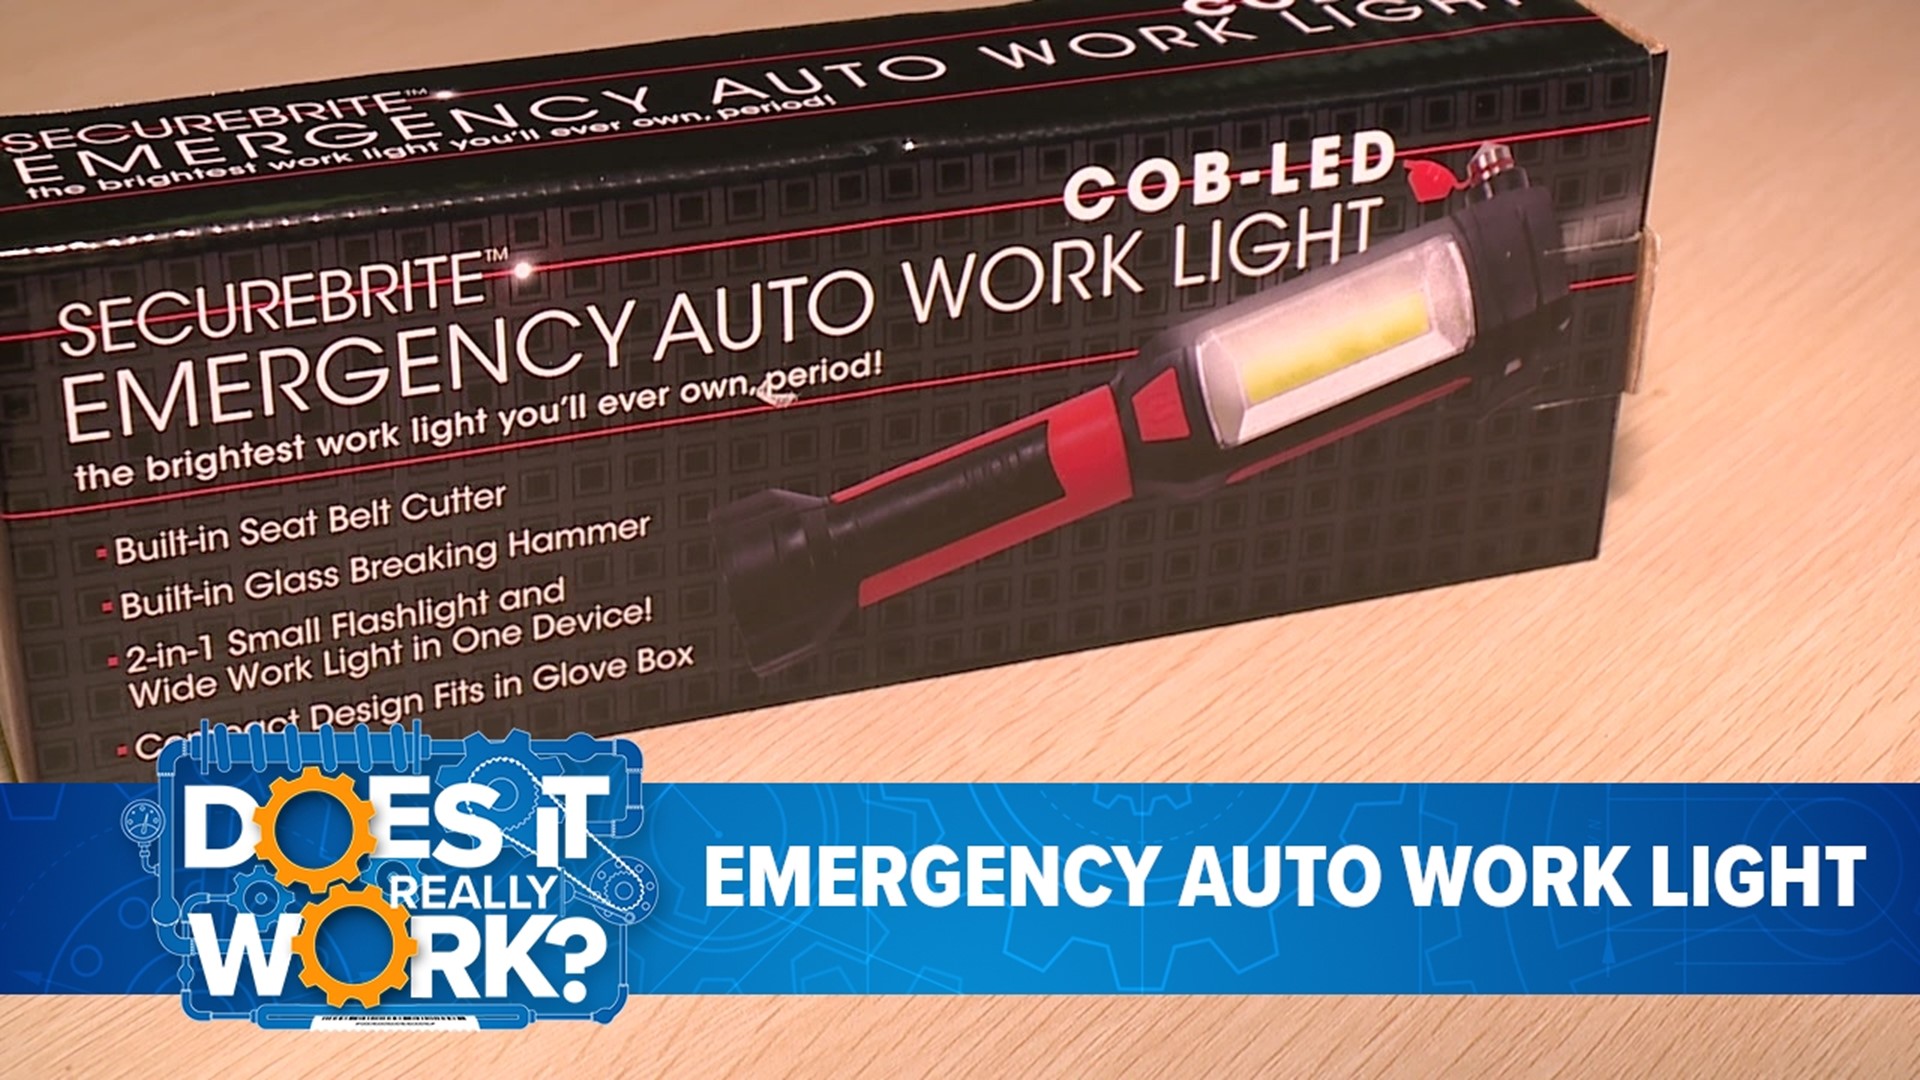 The maker claims, that with this emergency tool safely stored in your vehicle's glove compartment, you'll be more prepared for whatever may come your way.